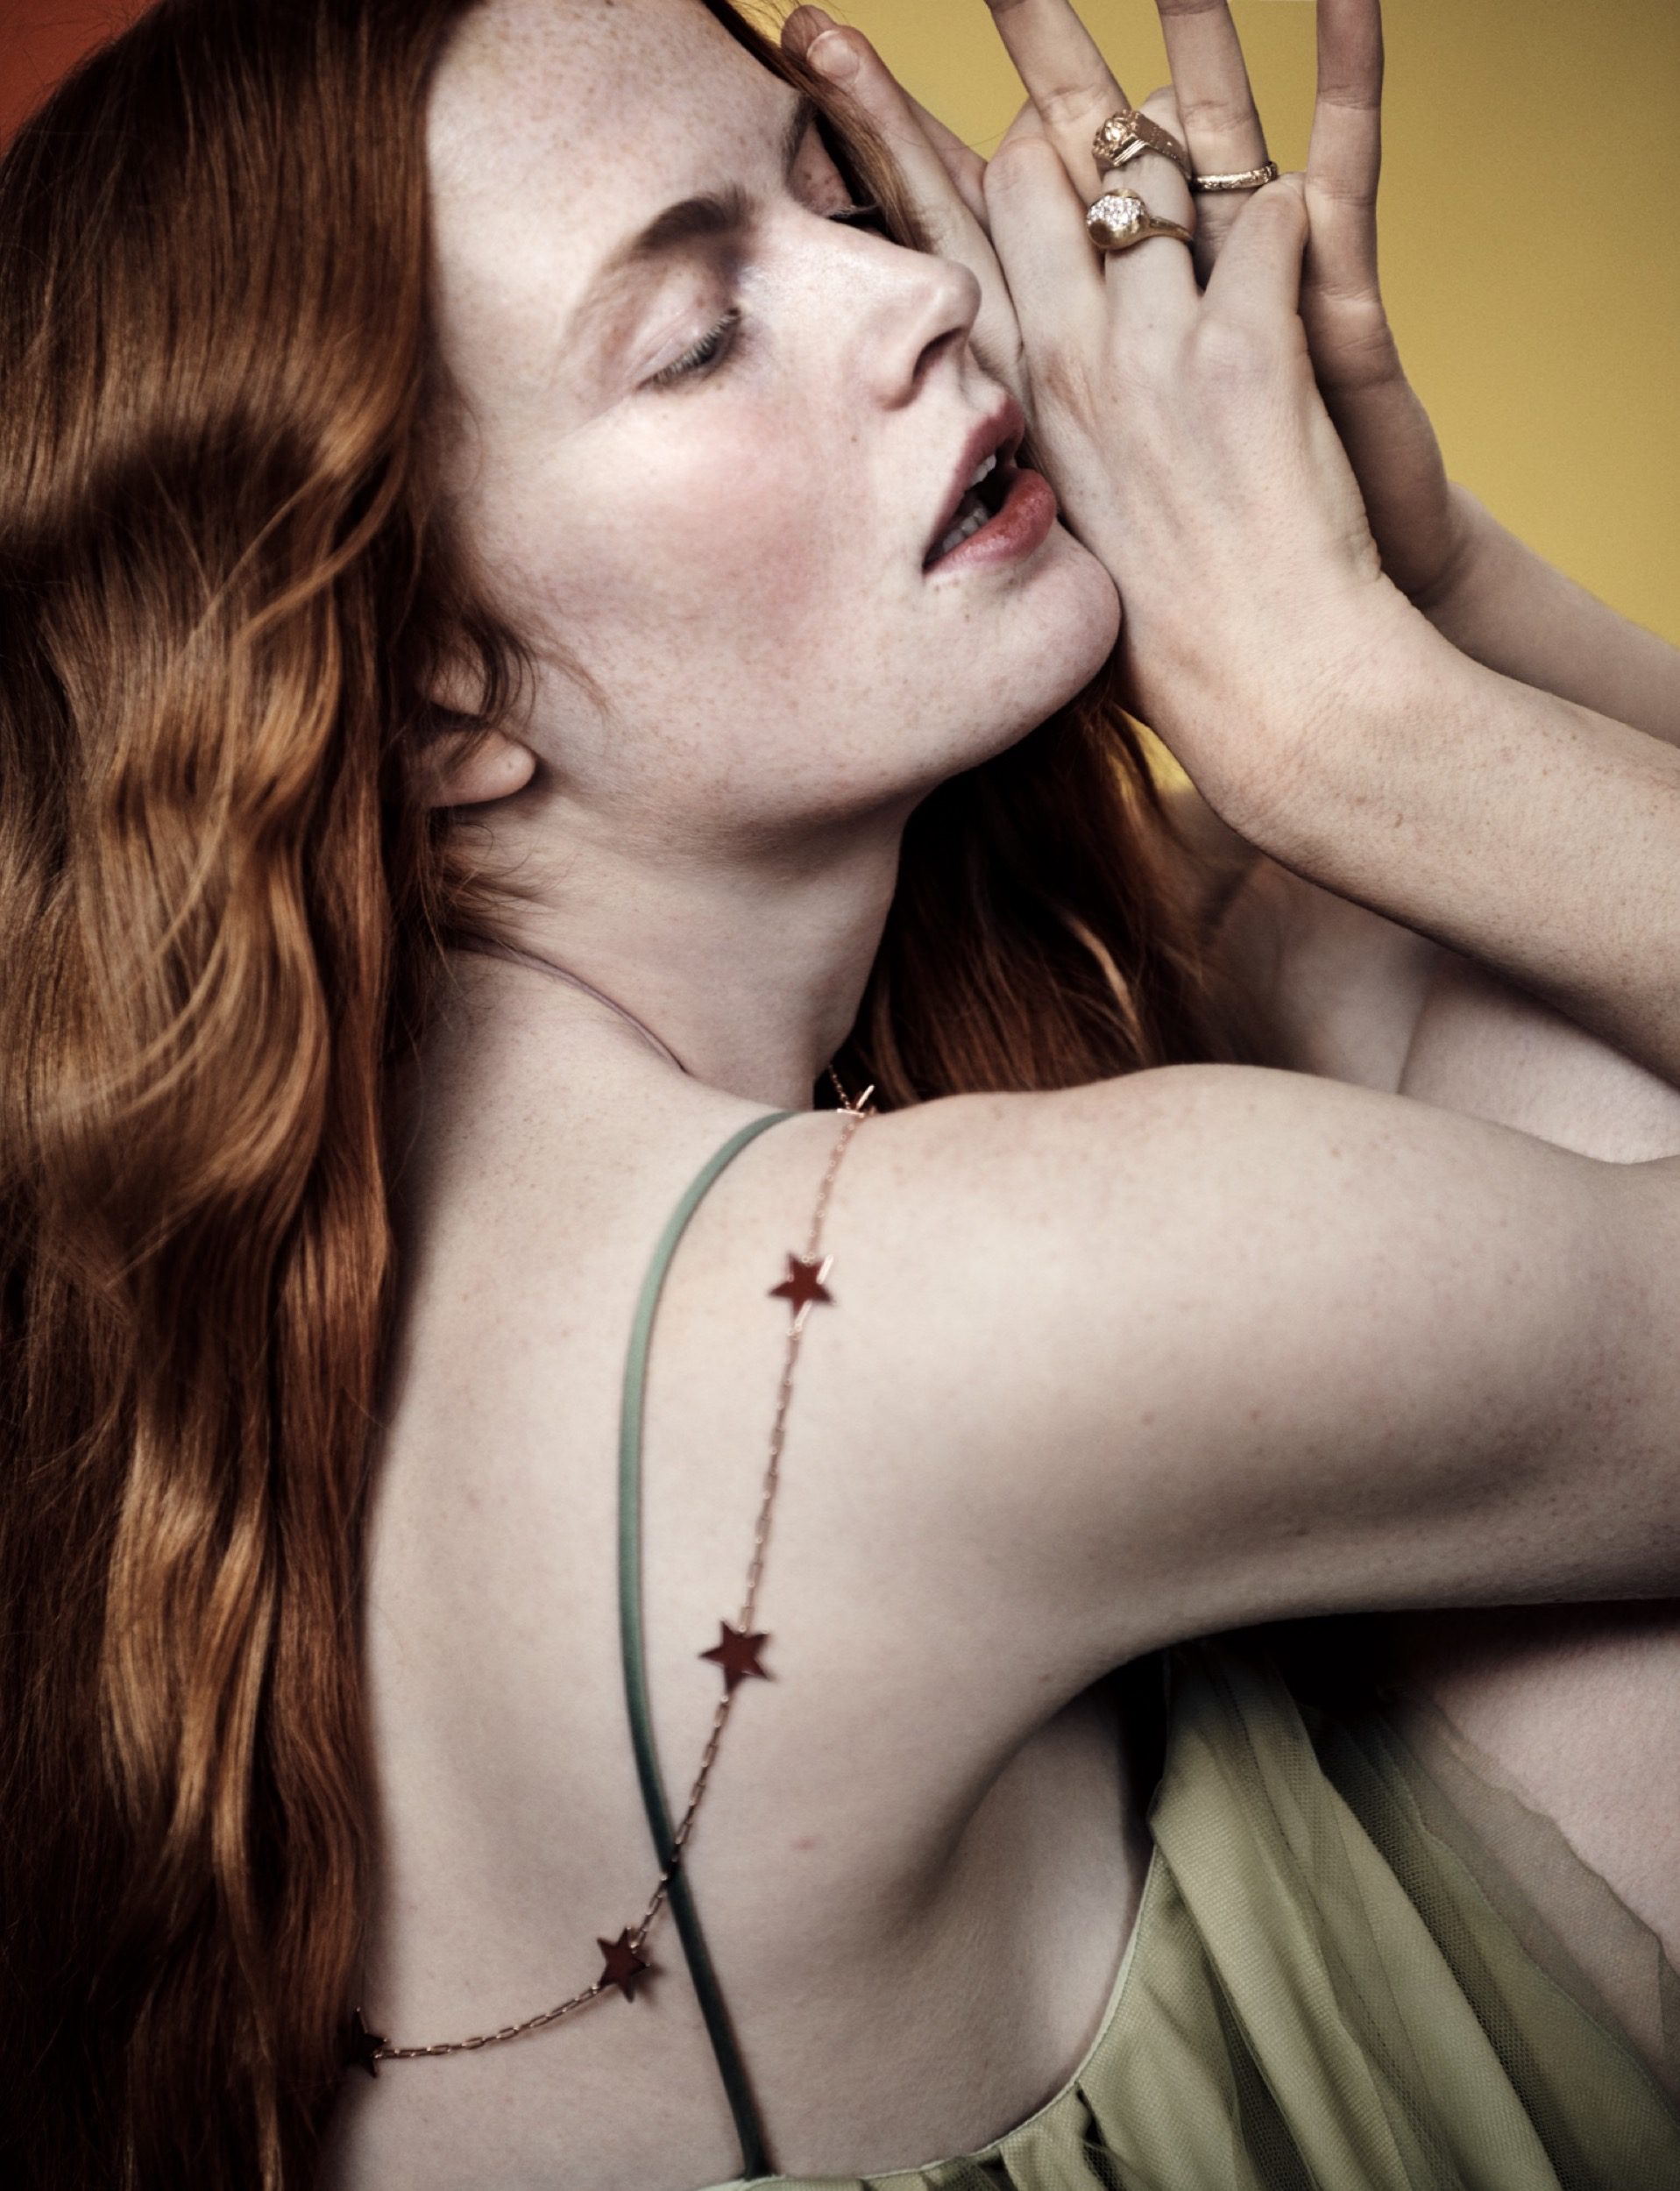 kathrin-hohberg-marie-claire-pre-raphaelite-jan-welters-02